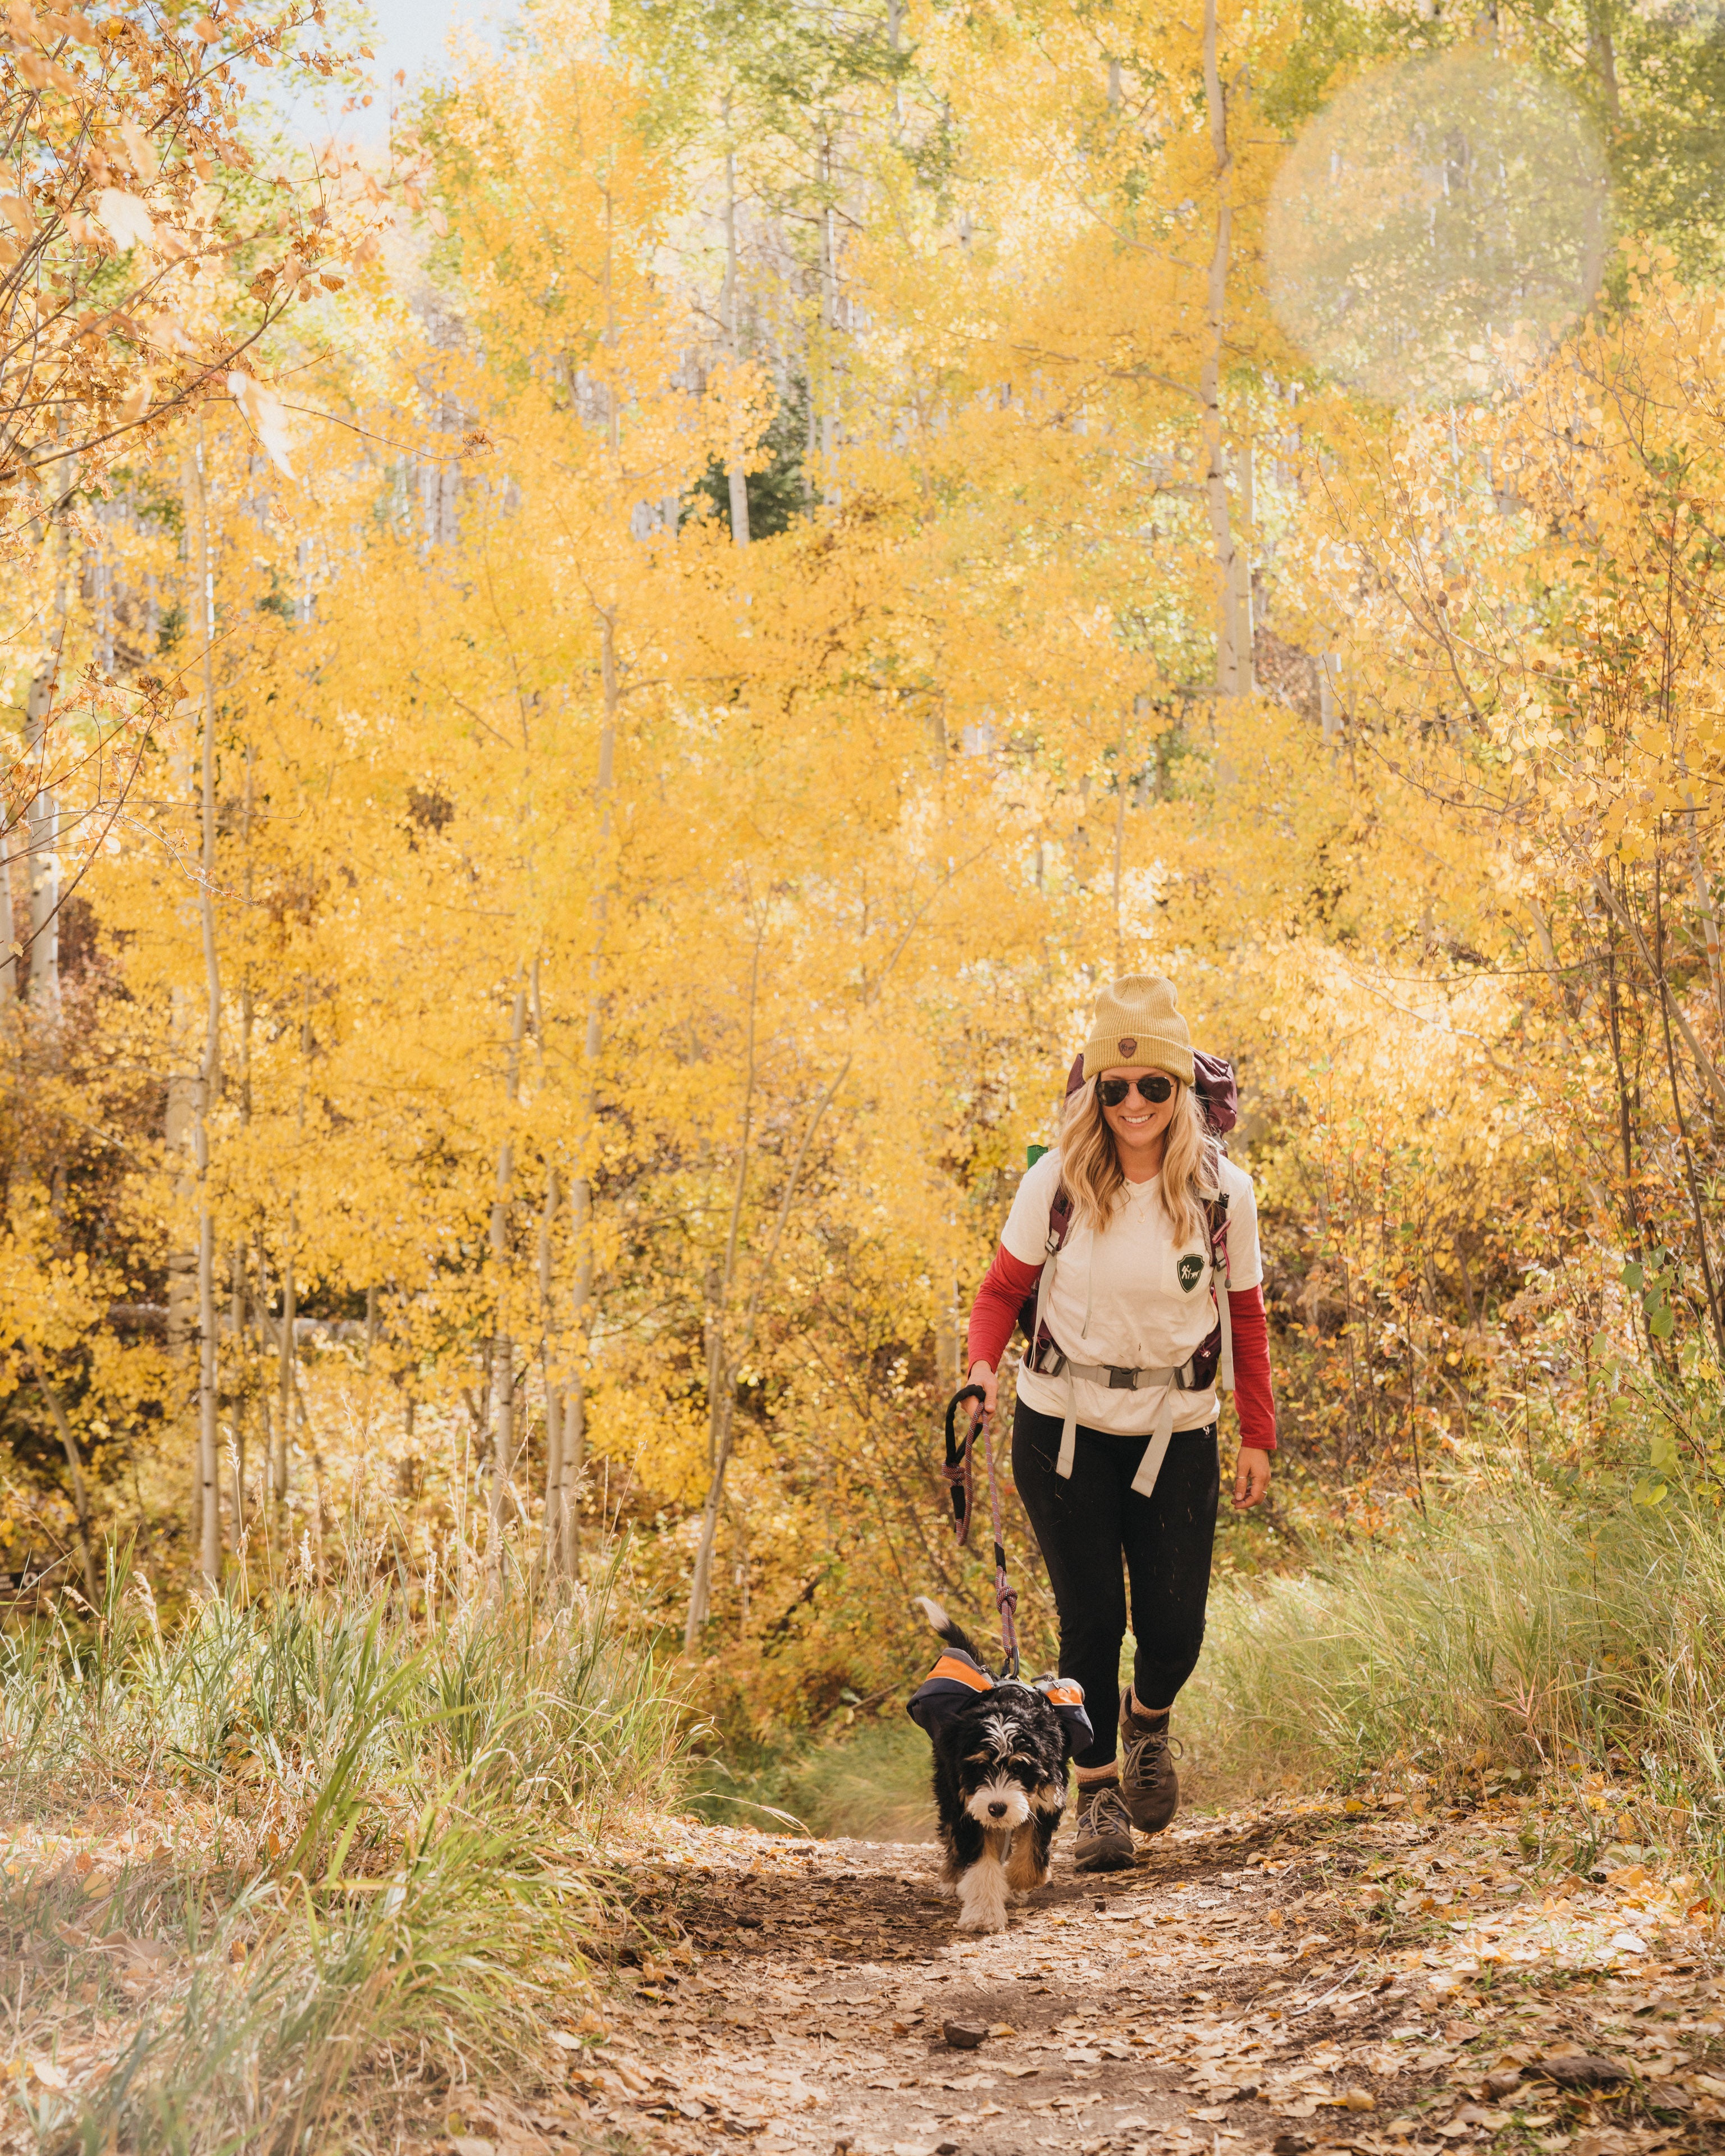 Best Places to Hike This Fall